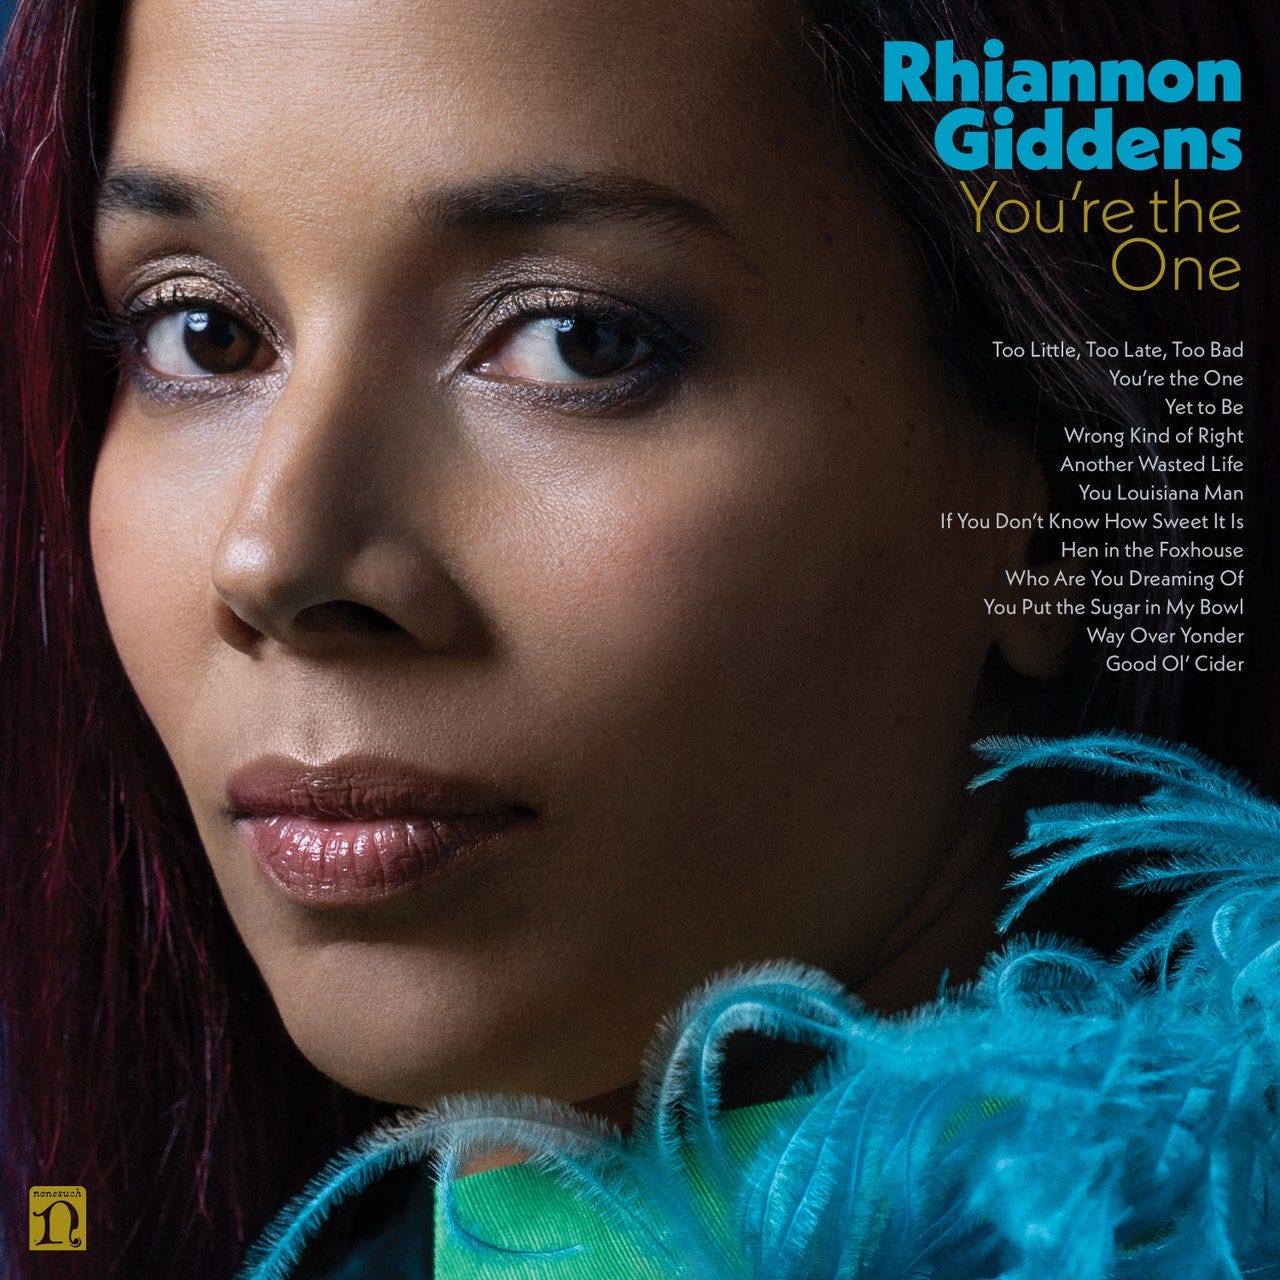 Rhiannon Giddens: You're the One Album Review | Pitchfork